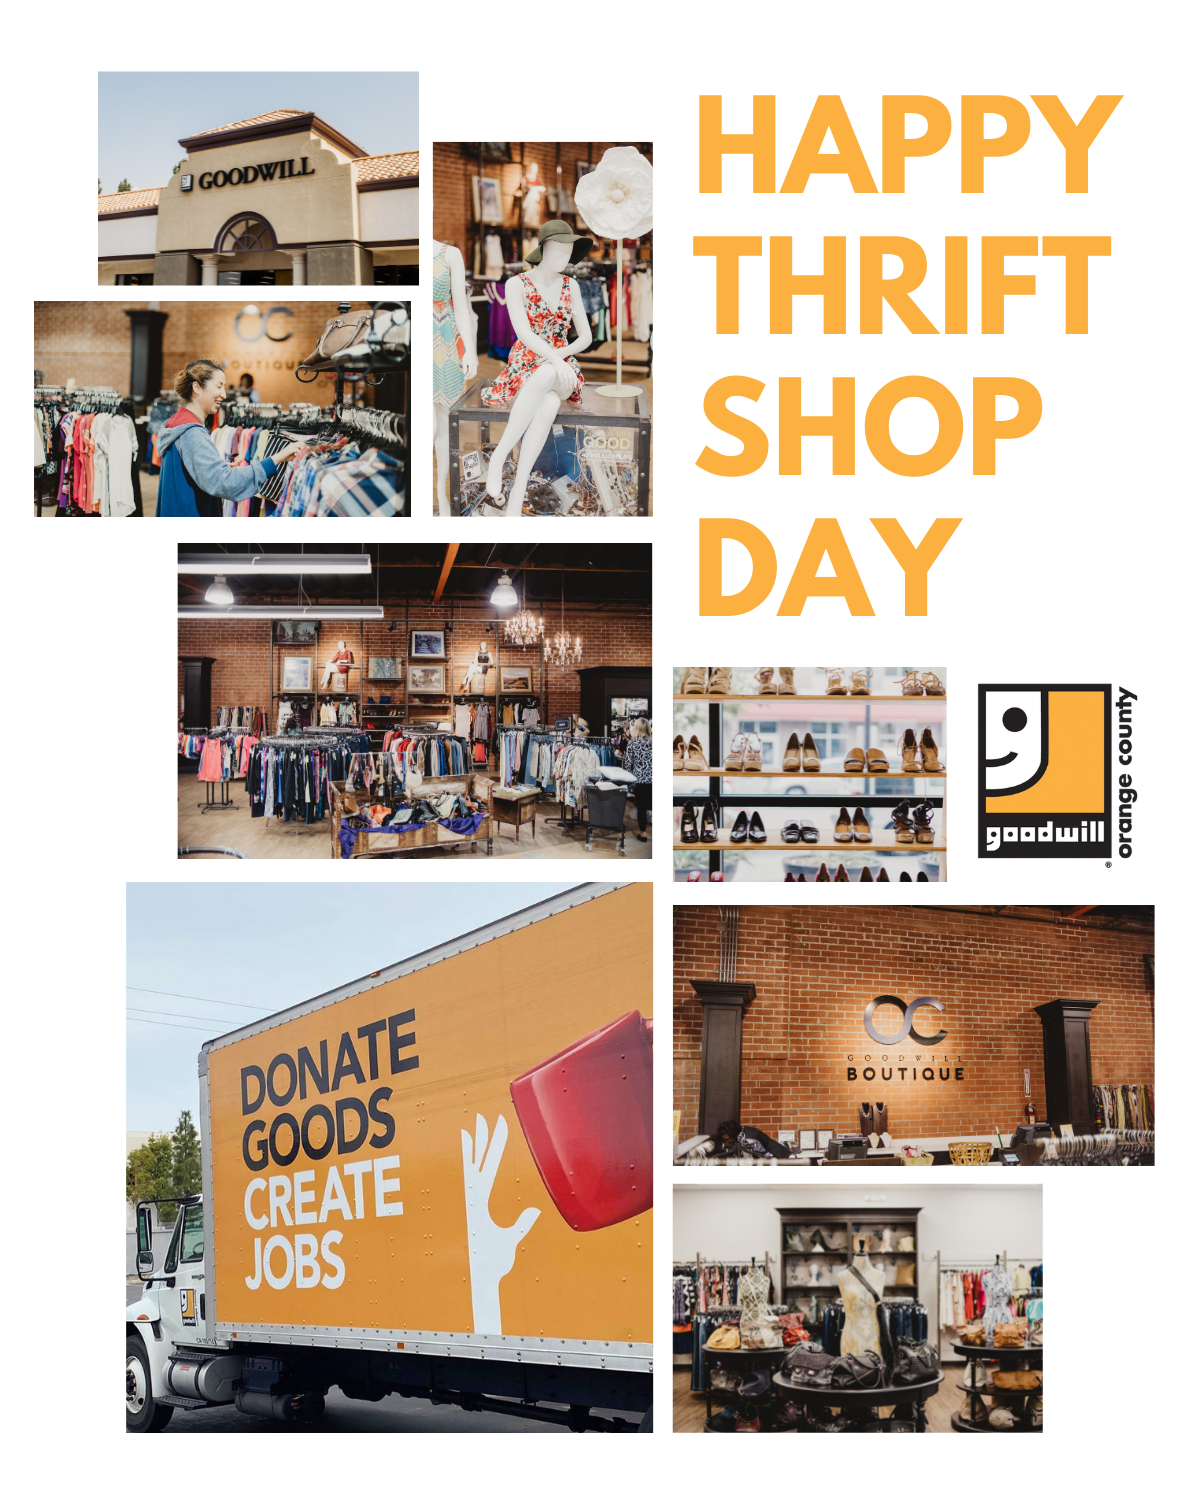 Happy thrift shop day poster